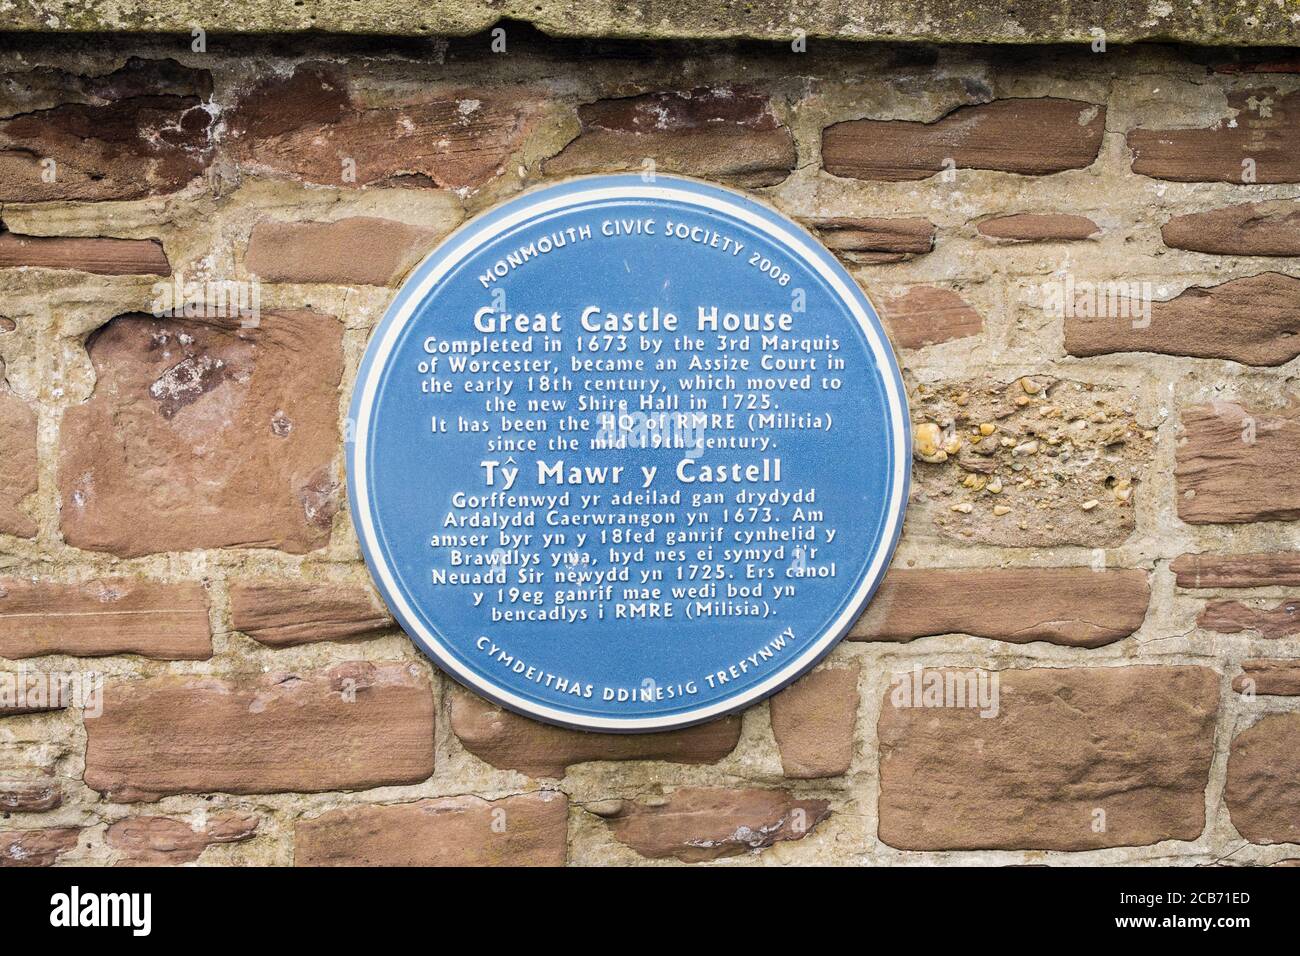 Bilingual historical Information plaque for Great Castle House RMRE HQ barracks in Welsh and English. Monmouth, Monmouthshire, Wales, UK, Britain Stock Photo